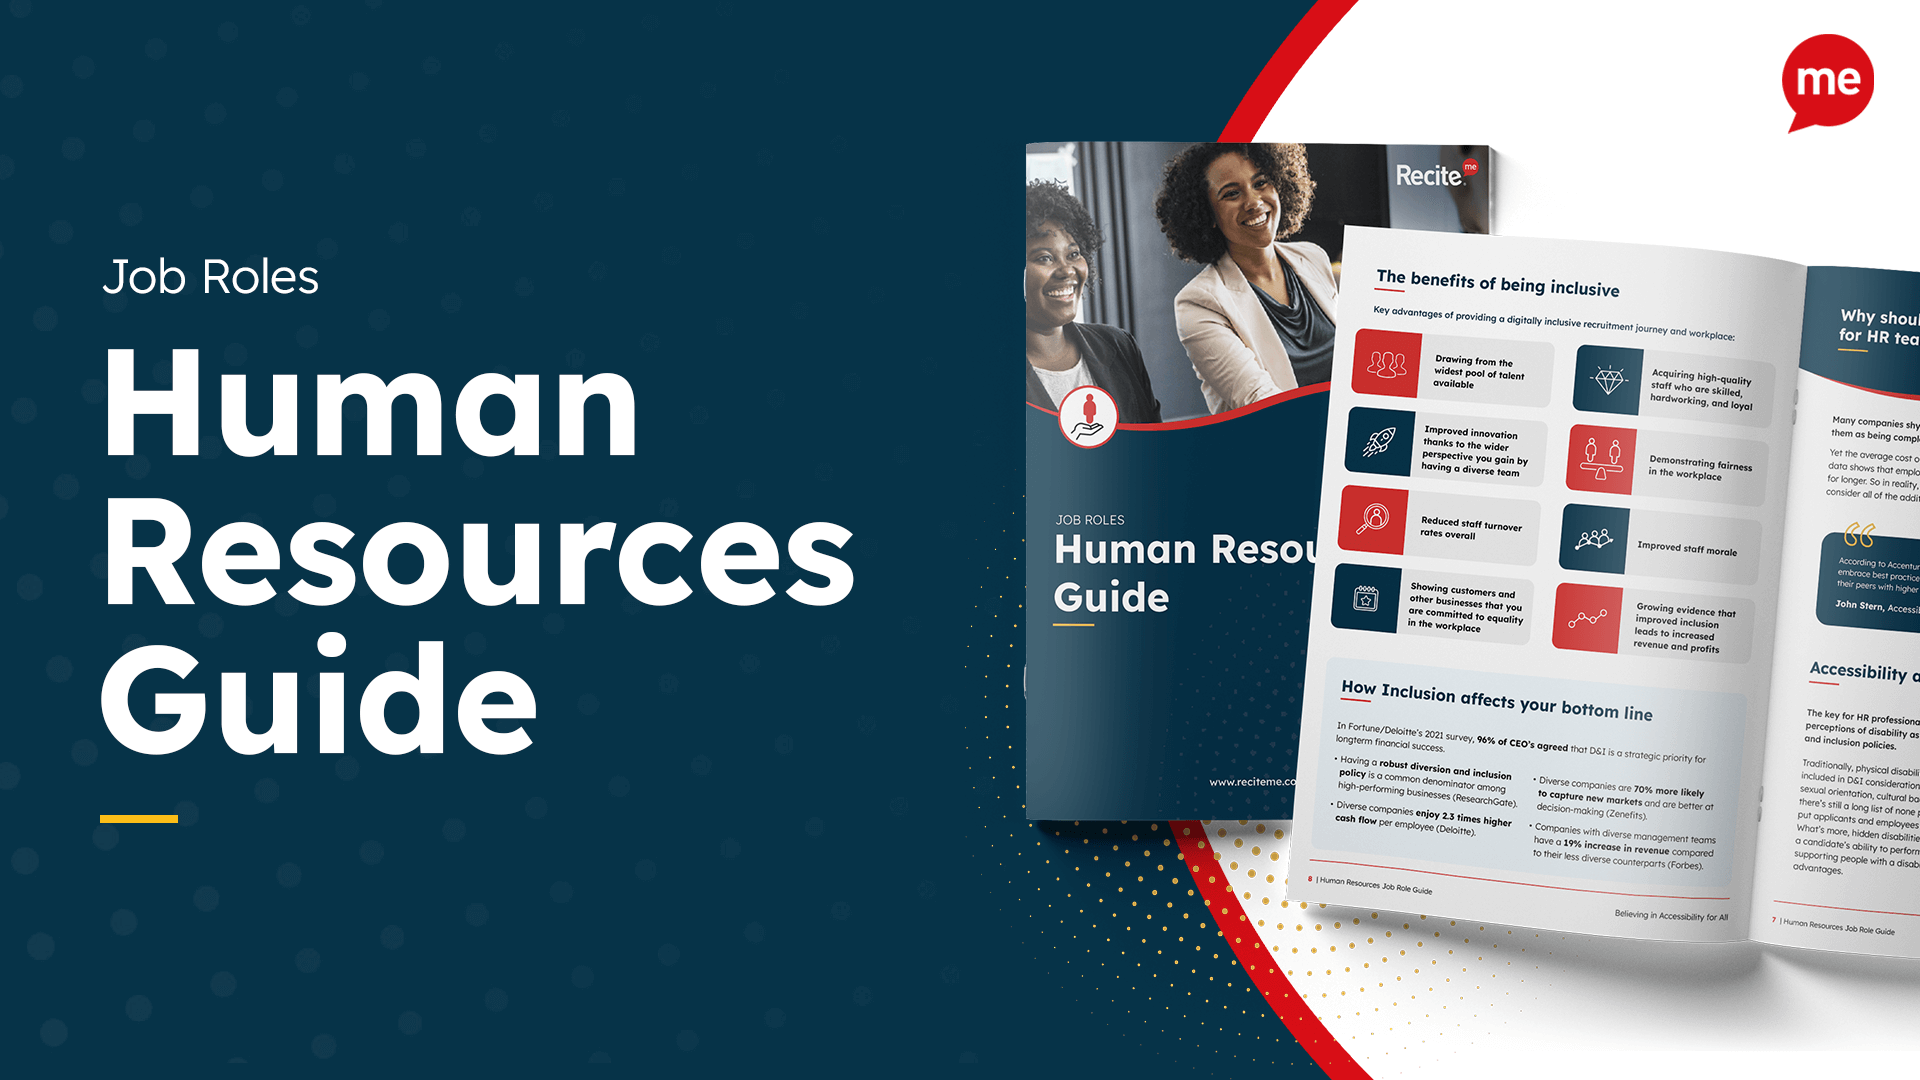 Online accessibility guide for human resources professionals